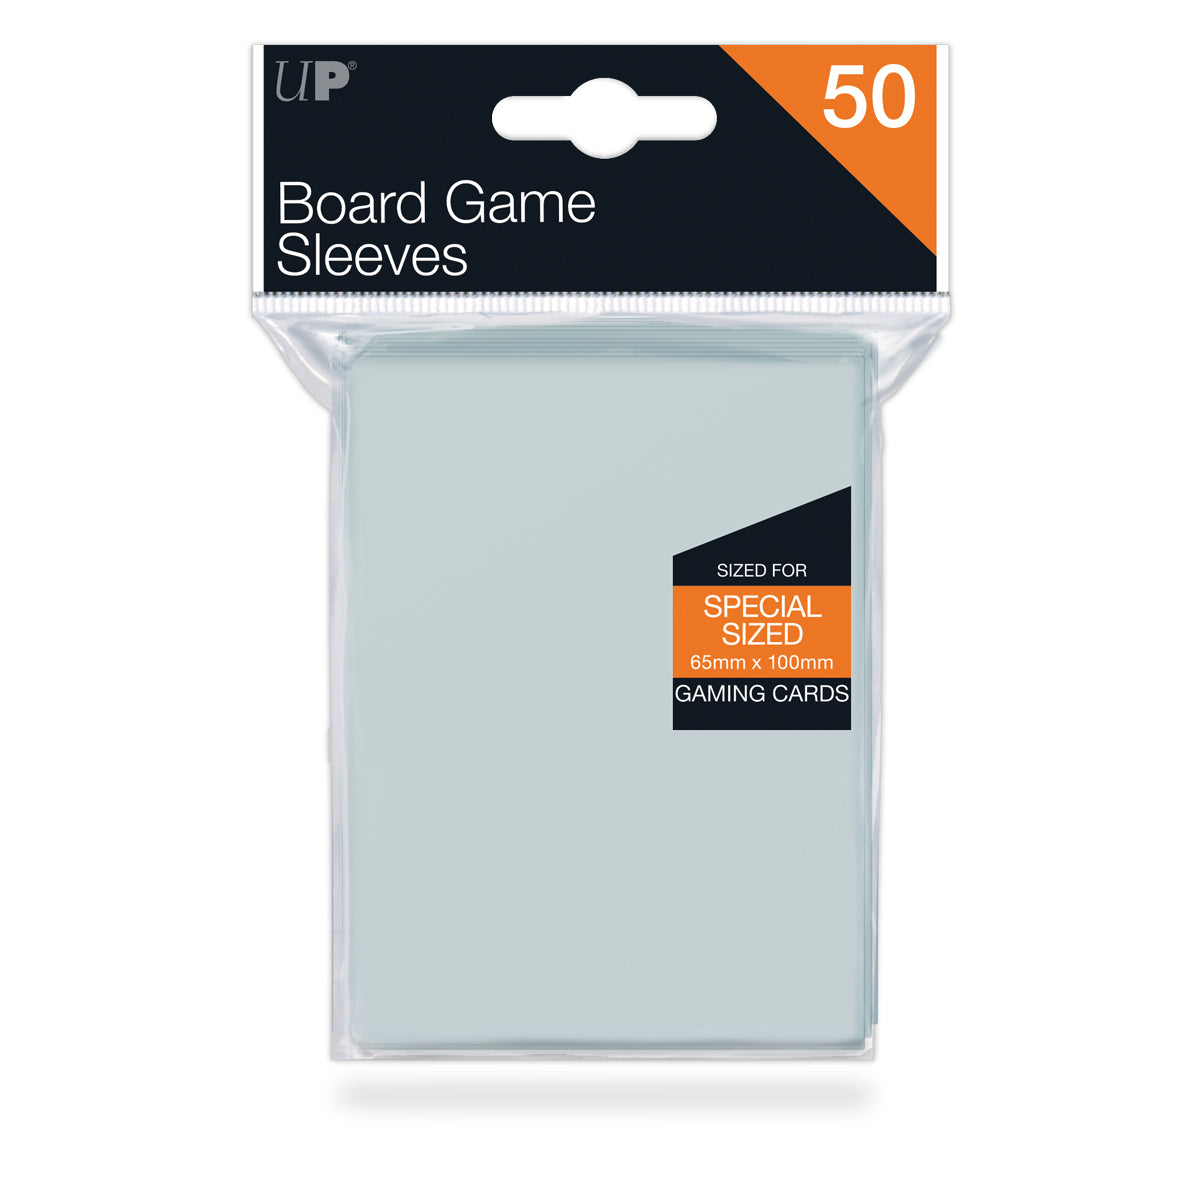 Ultra Pro Board Game Sleeves: Lite - Square (69 x 69mm), 100ct Clear —  LVLUP GAMES